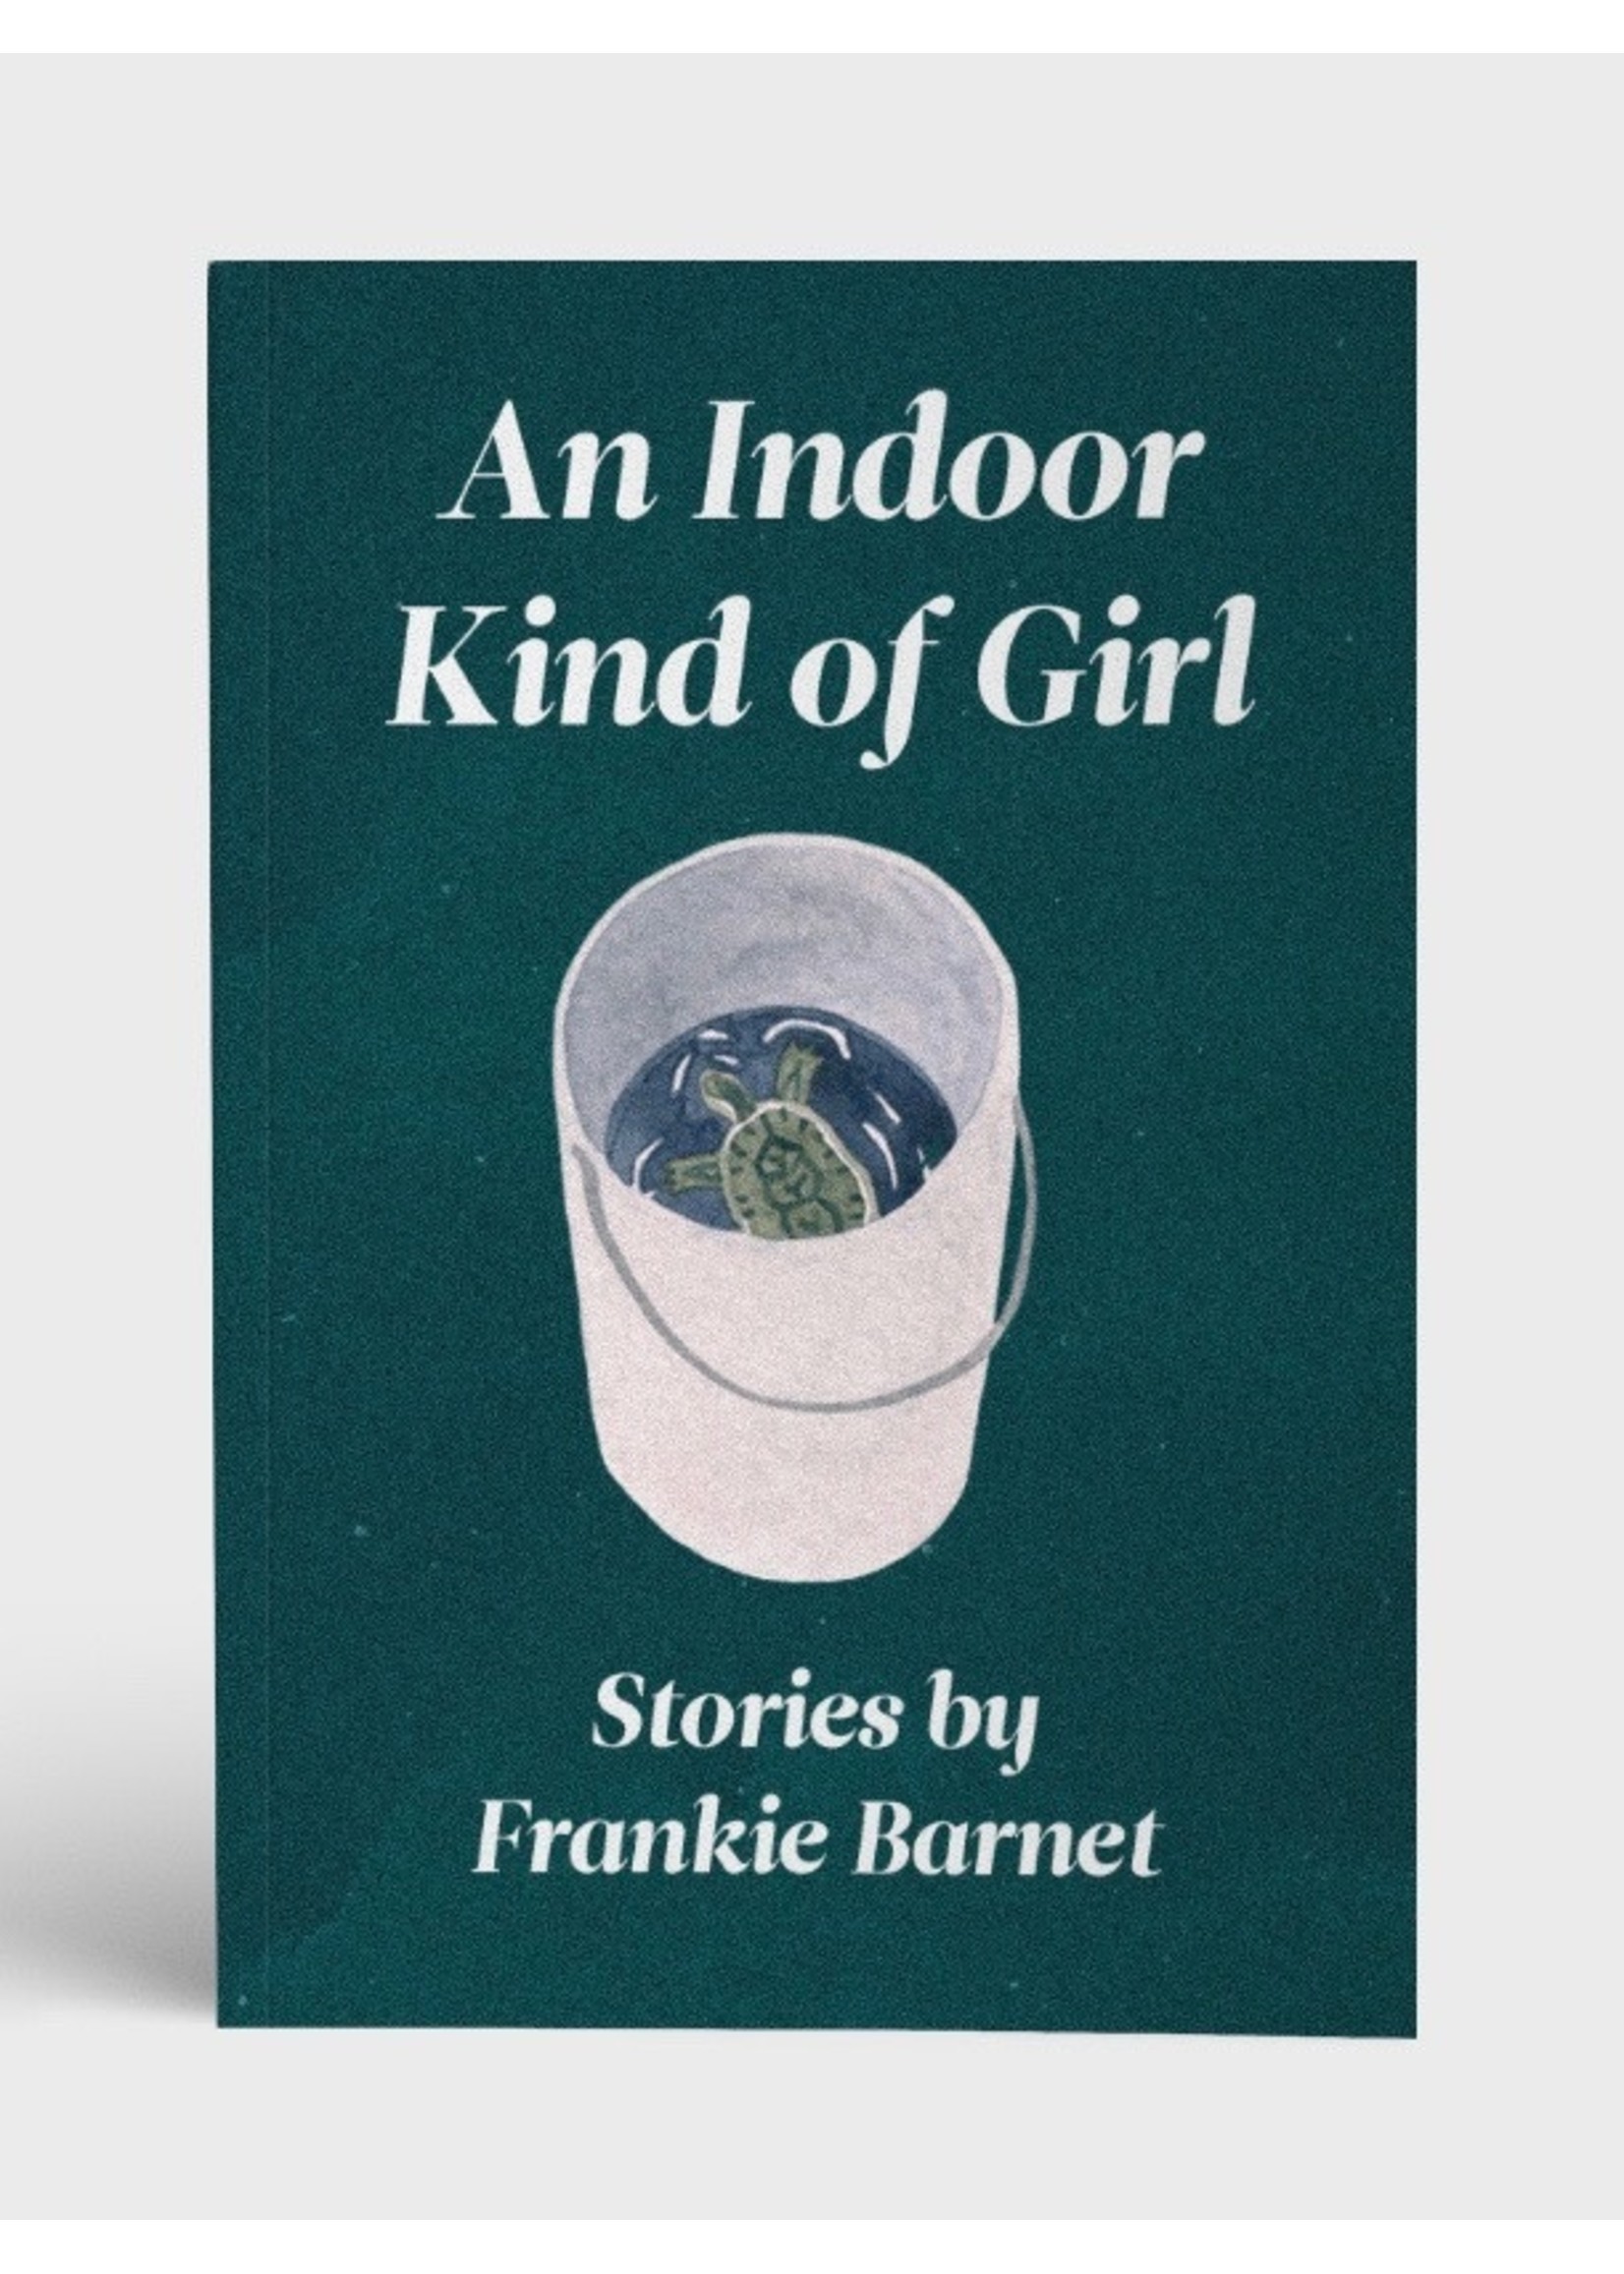 Metatron Press "An Indoor Kind of Girl" by Frankie Barnet, published by Metatron Press